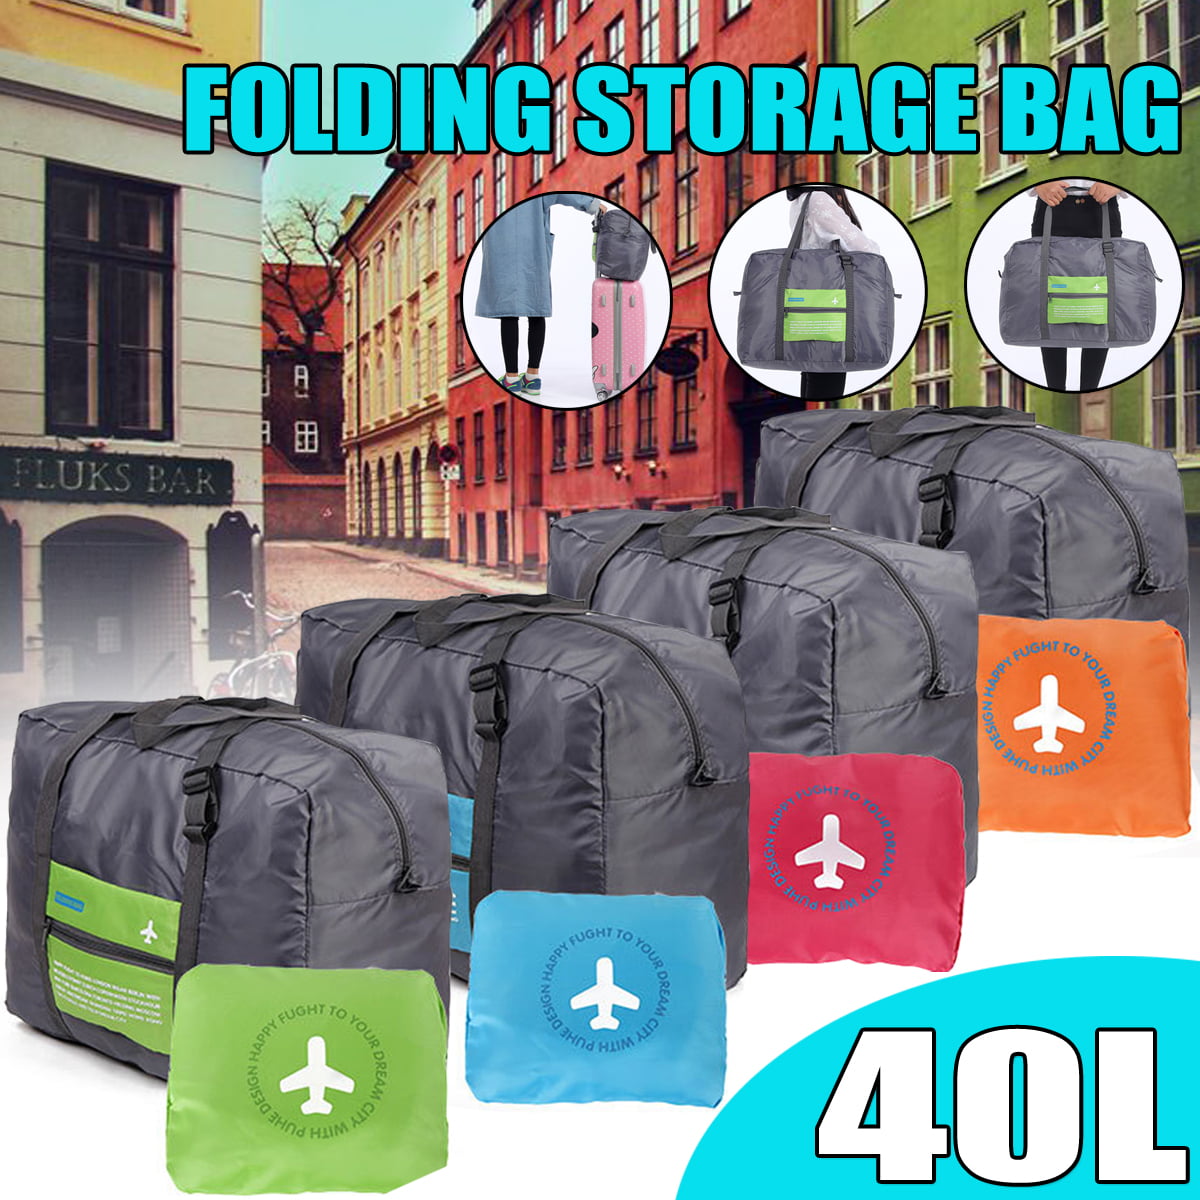 Large Capacity Travel Storage Bag Foldable Shoes Clothes Luggage Case Waterproof Duffle Bag for ...